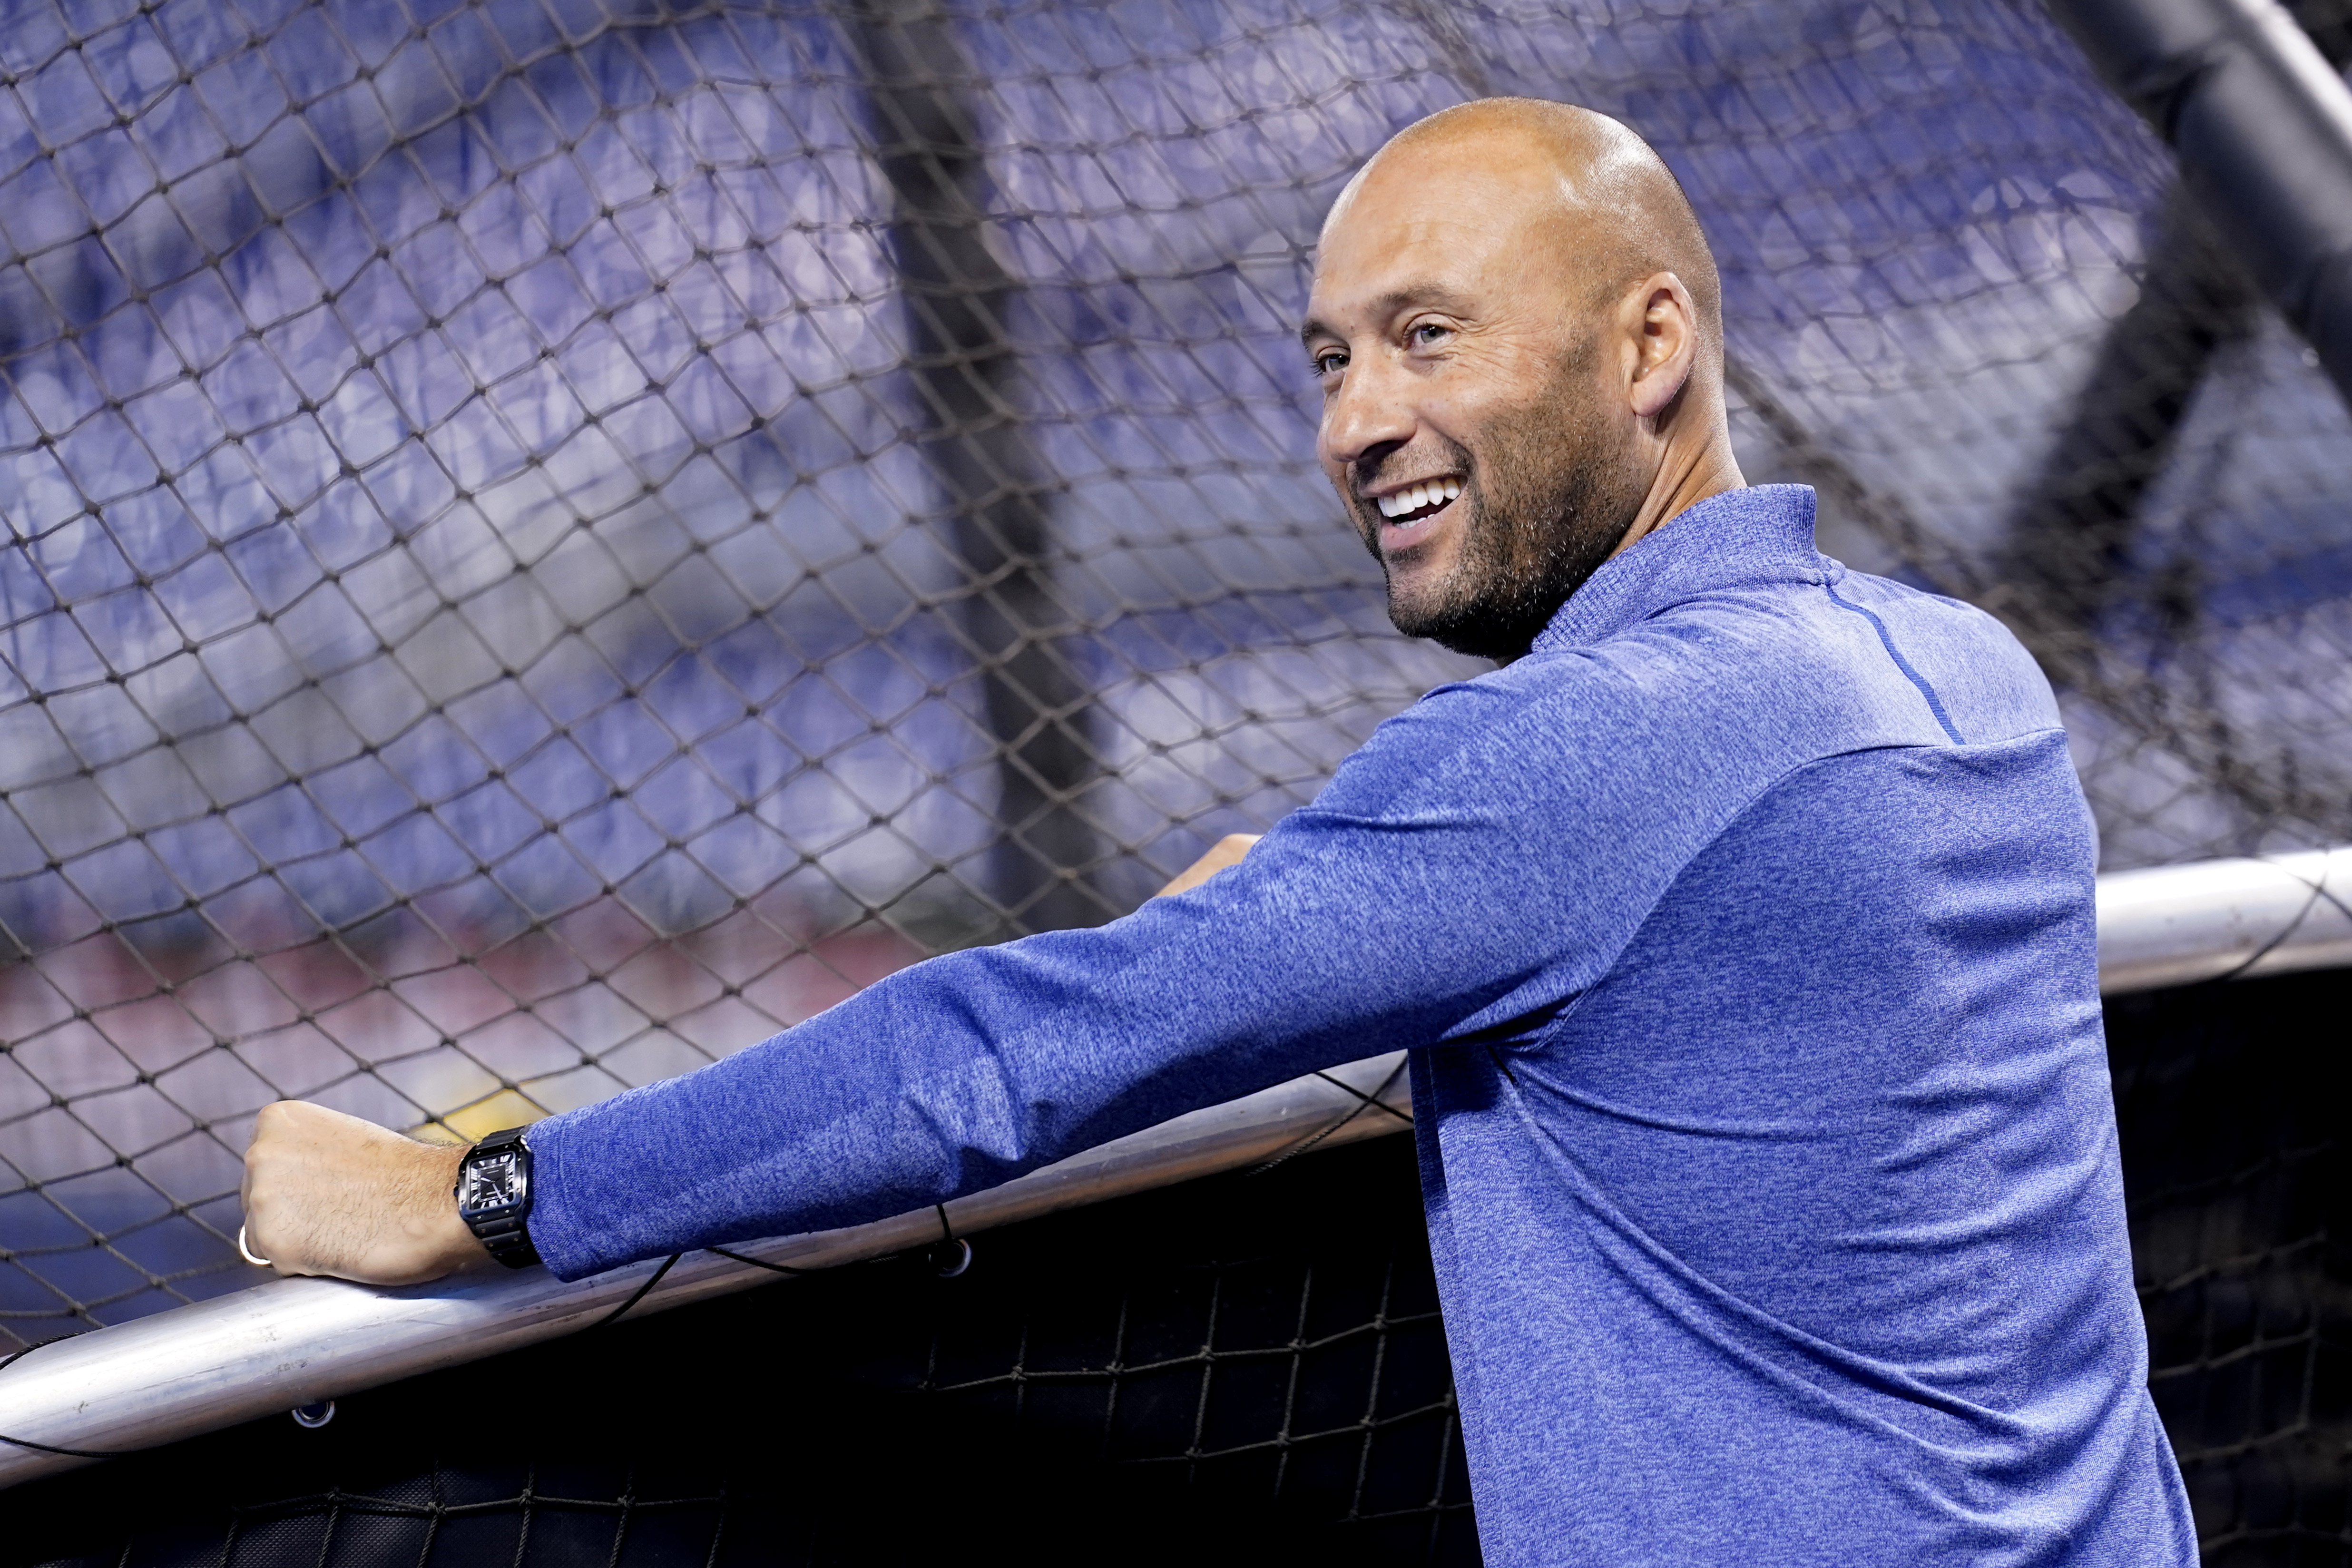 As If Fans Needed Another Reason To Not Go To Marlins Games, Jeter